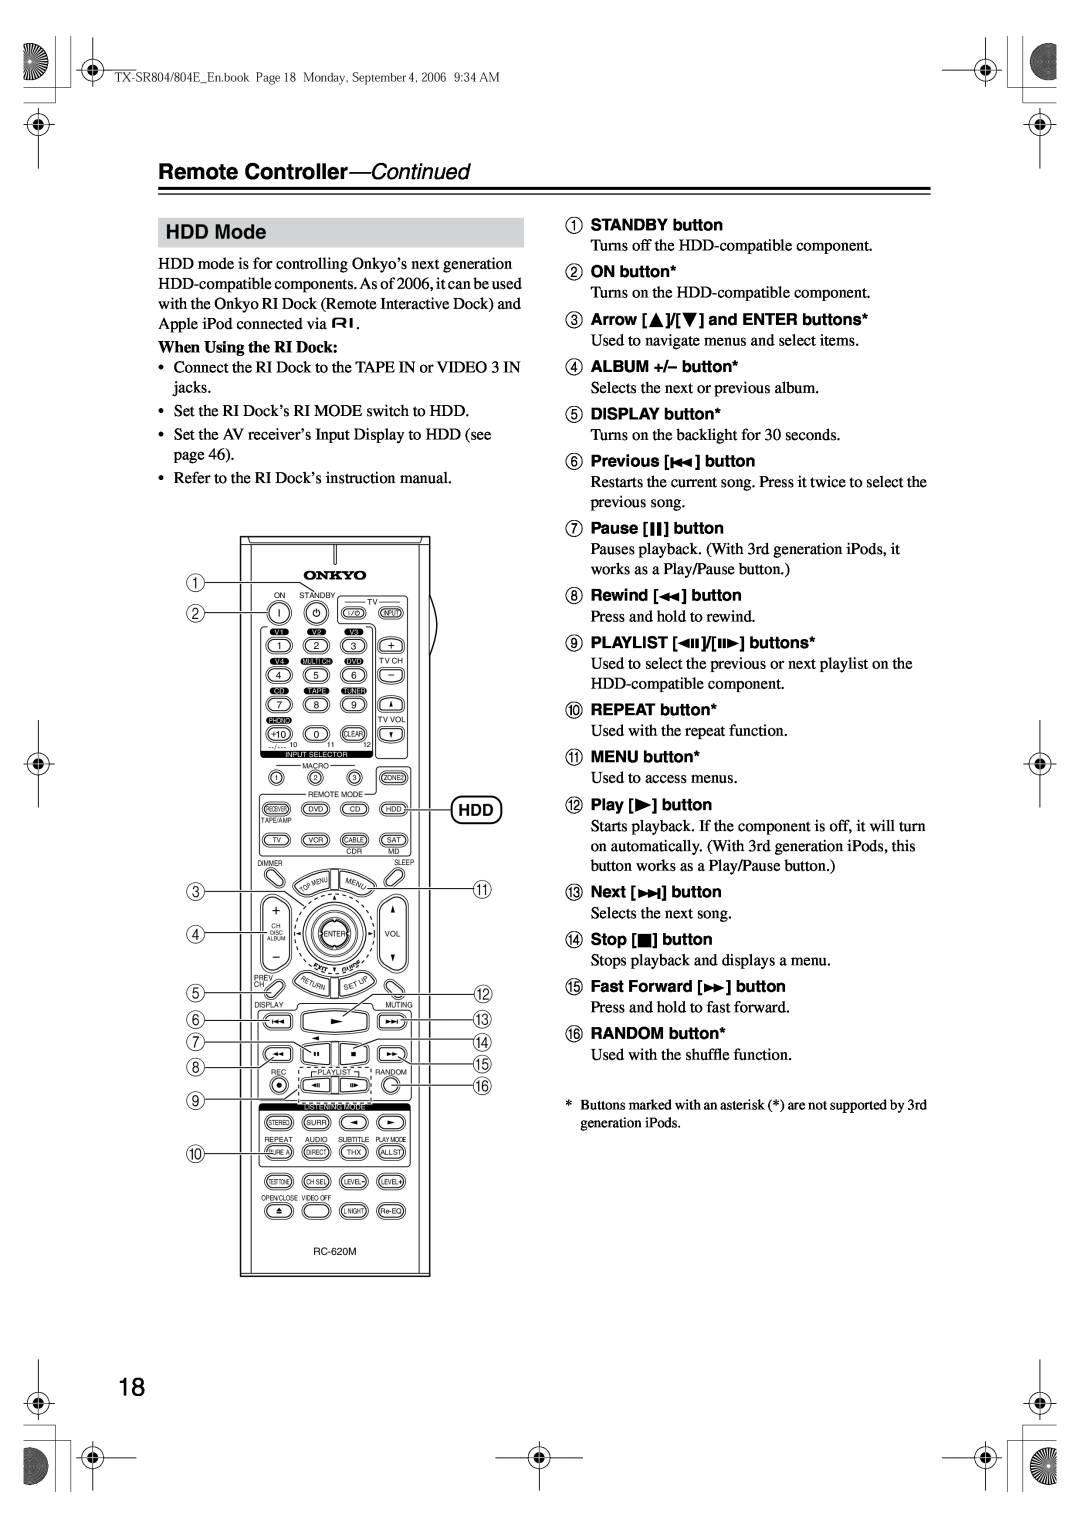 Onkyo TX-SR804E instruction manual HDD Mode, Remote Controller—Continued 